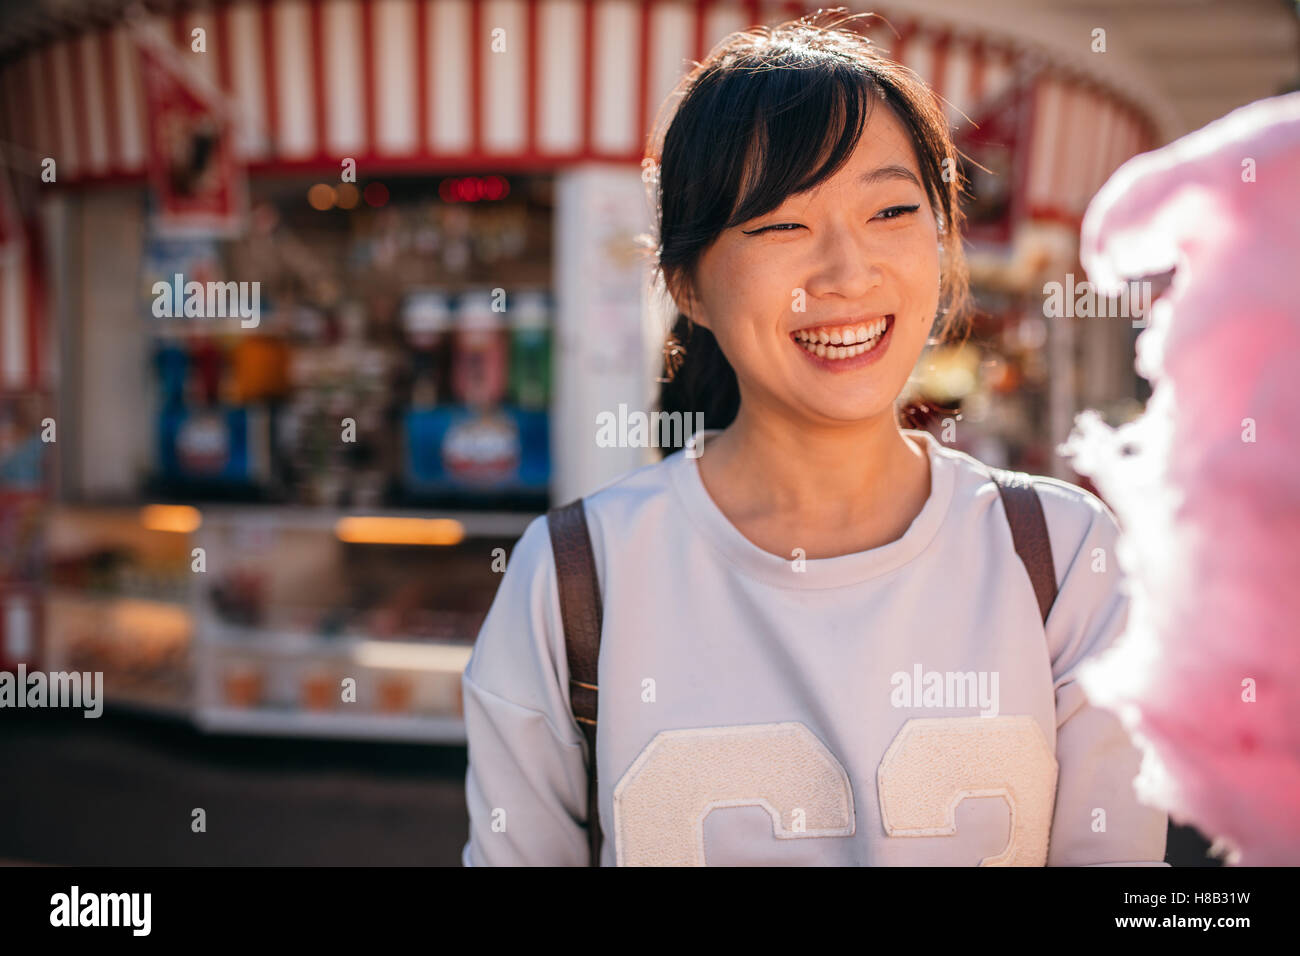 Shot of young asian woman at amusement park with cotton candy floss. Smiling female with candyfloss at fairground. Stock Photo